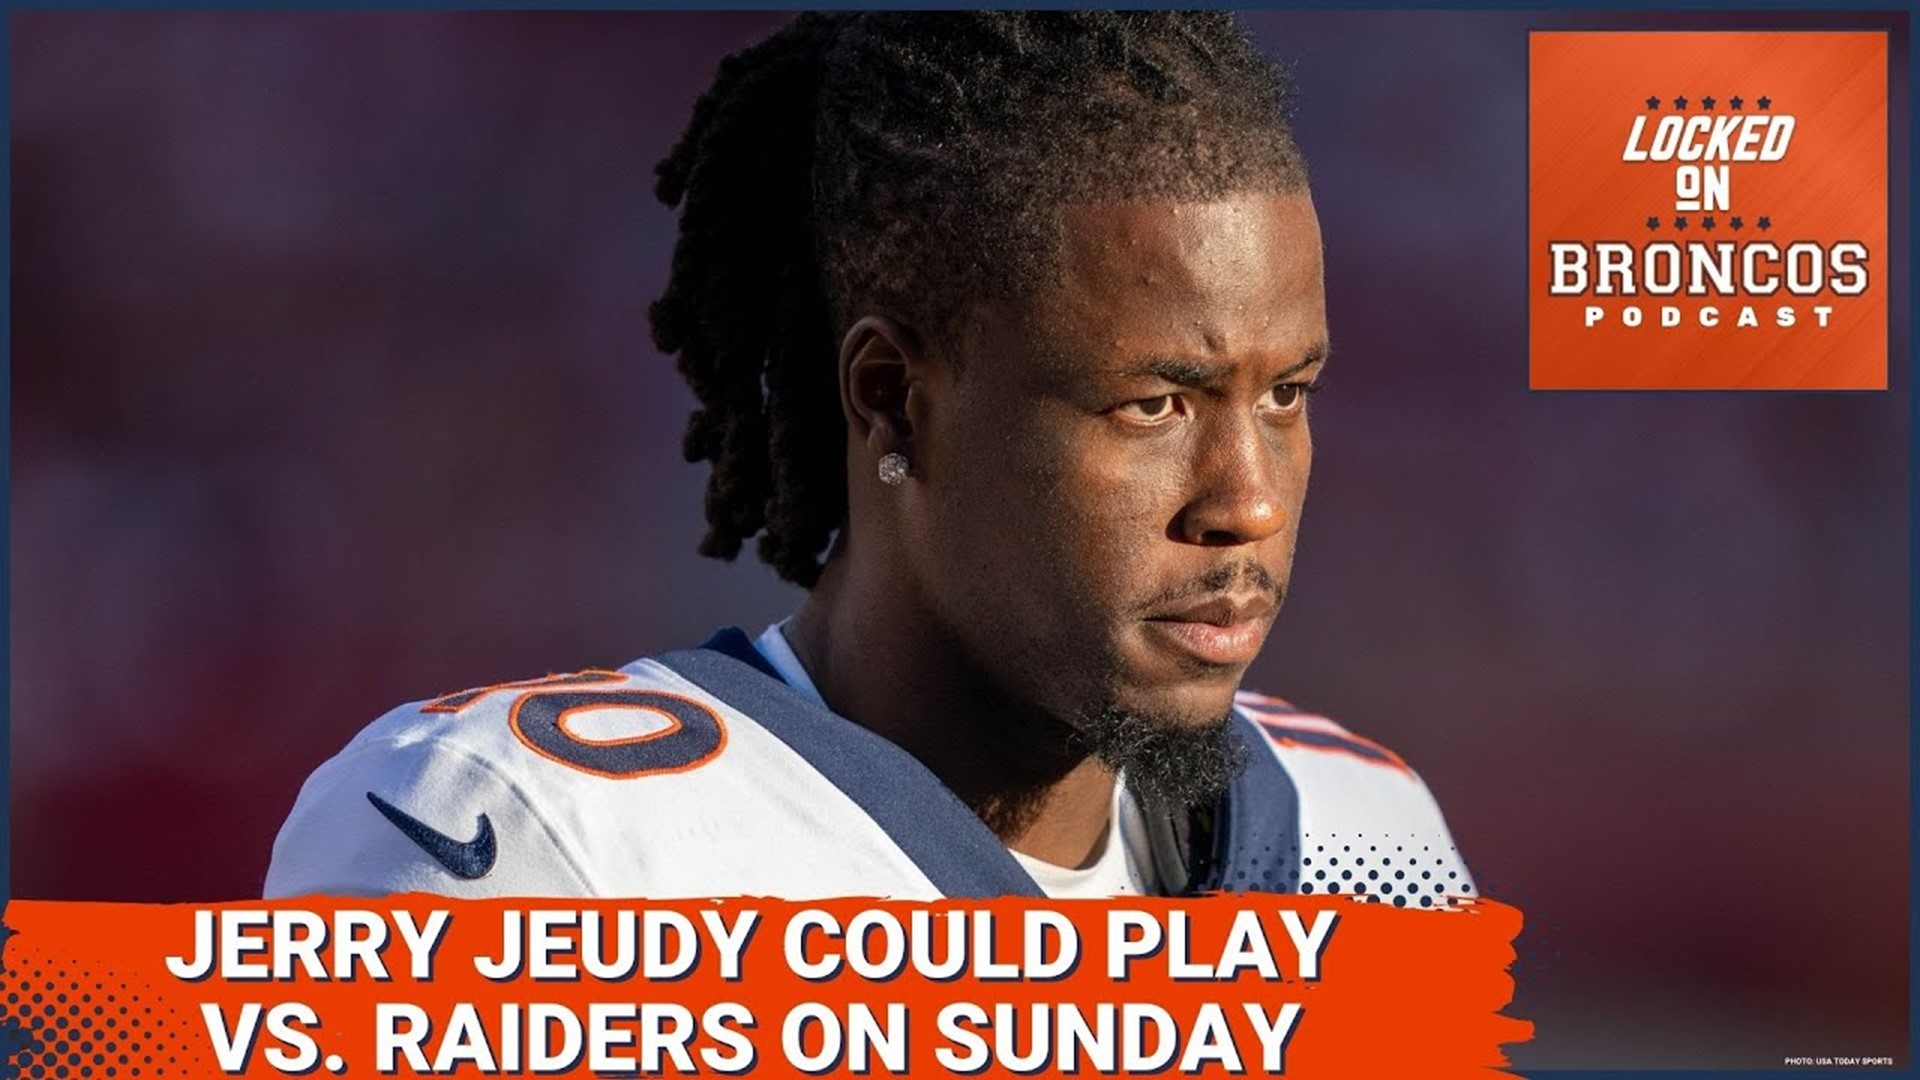 Denver Broncos wide receiver Jerry Jeudy is making great progress in his recovery from a hamstring injury and could play vs. the Las Vegas Raiders.